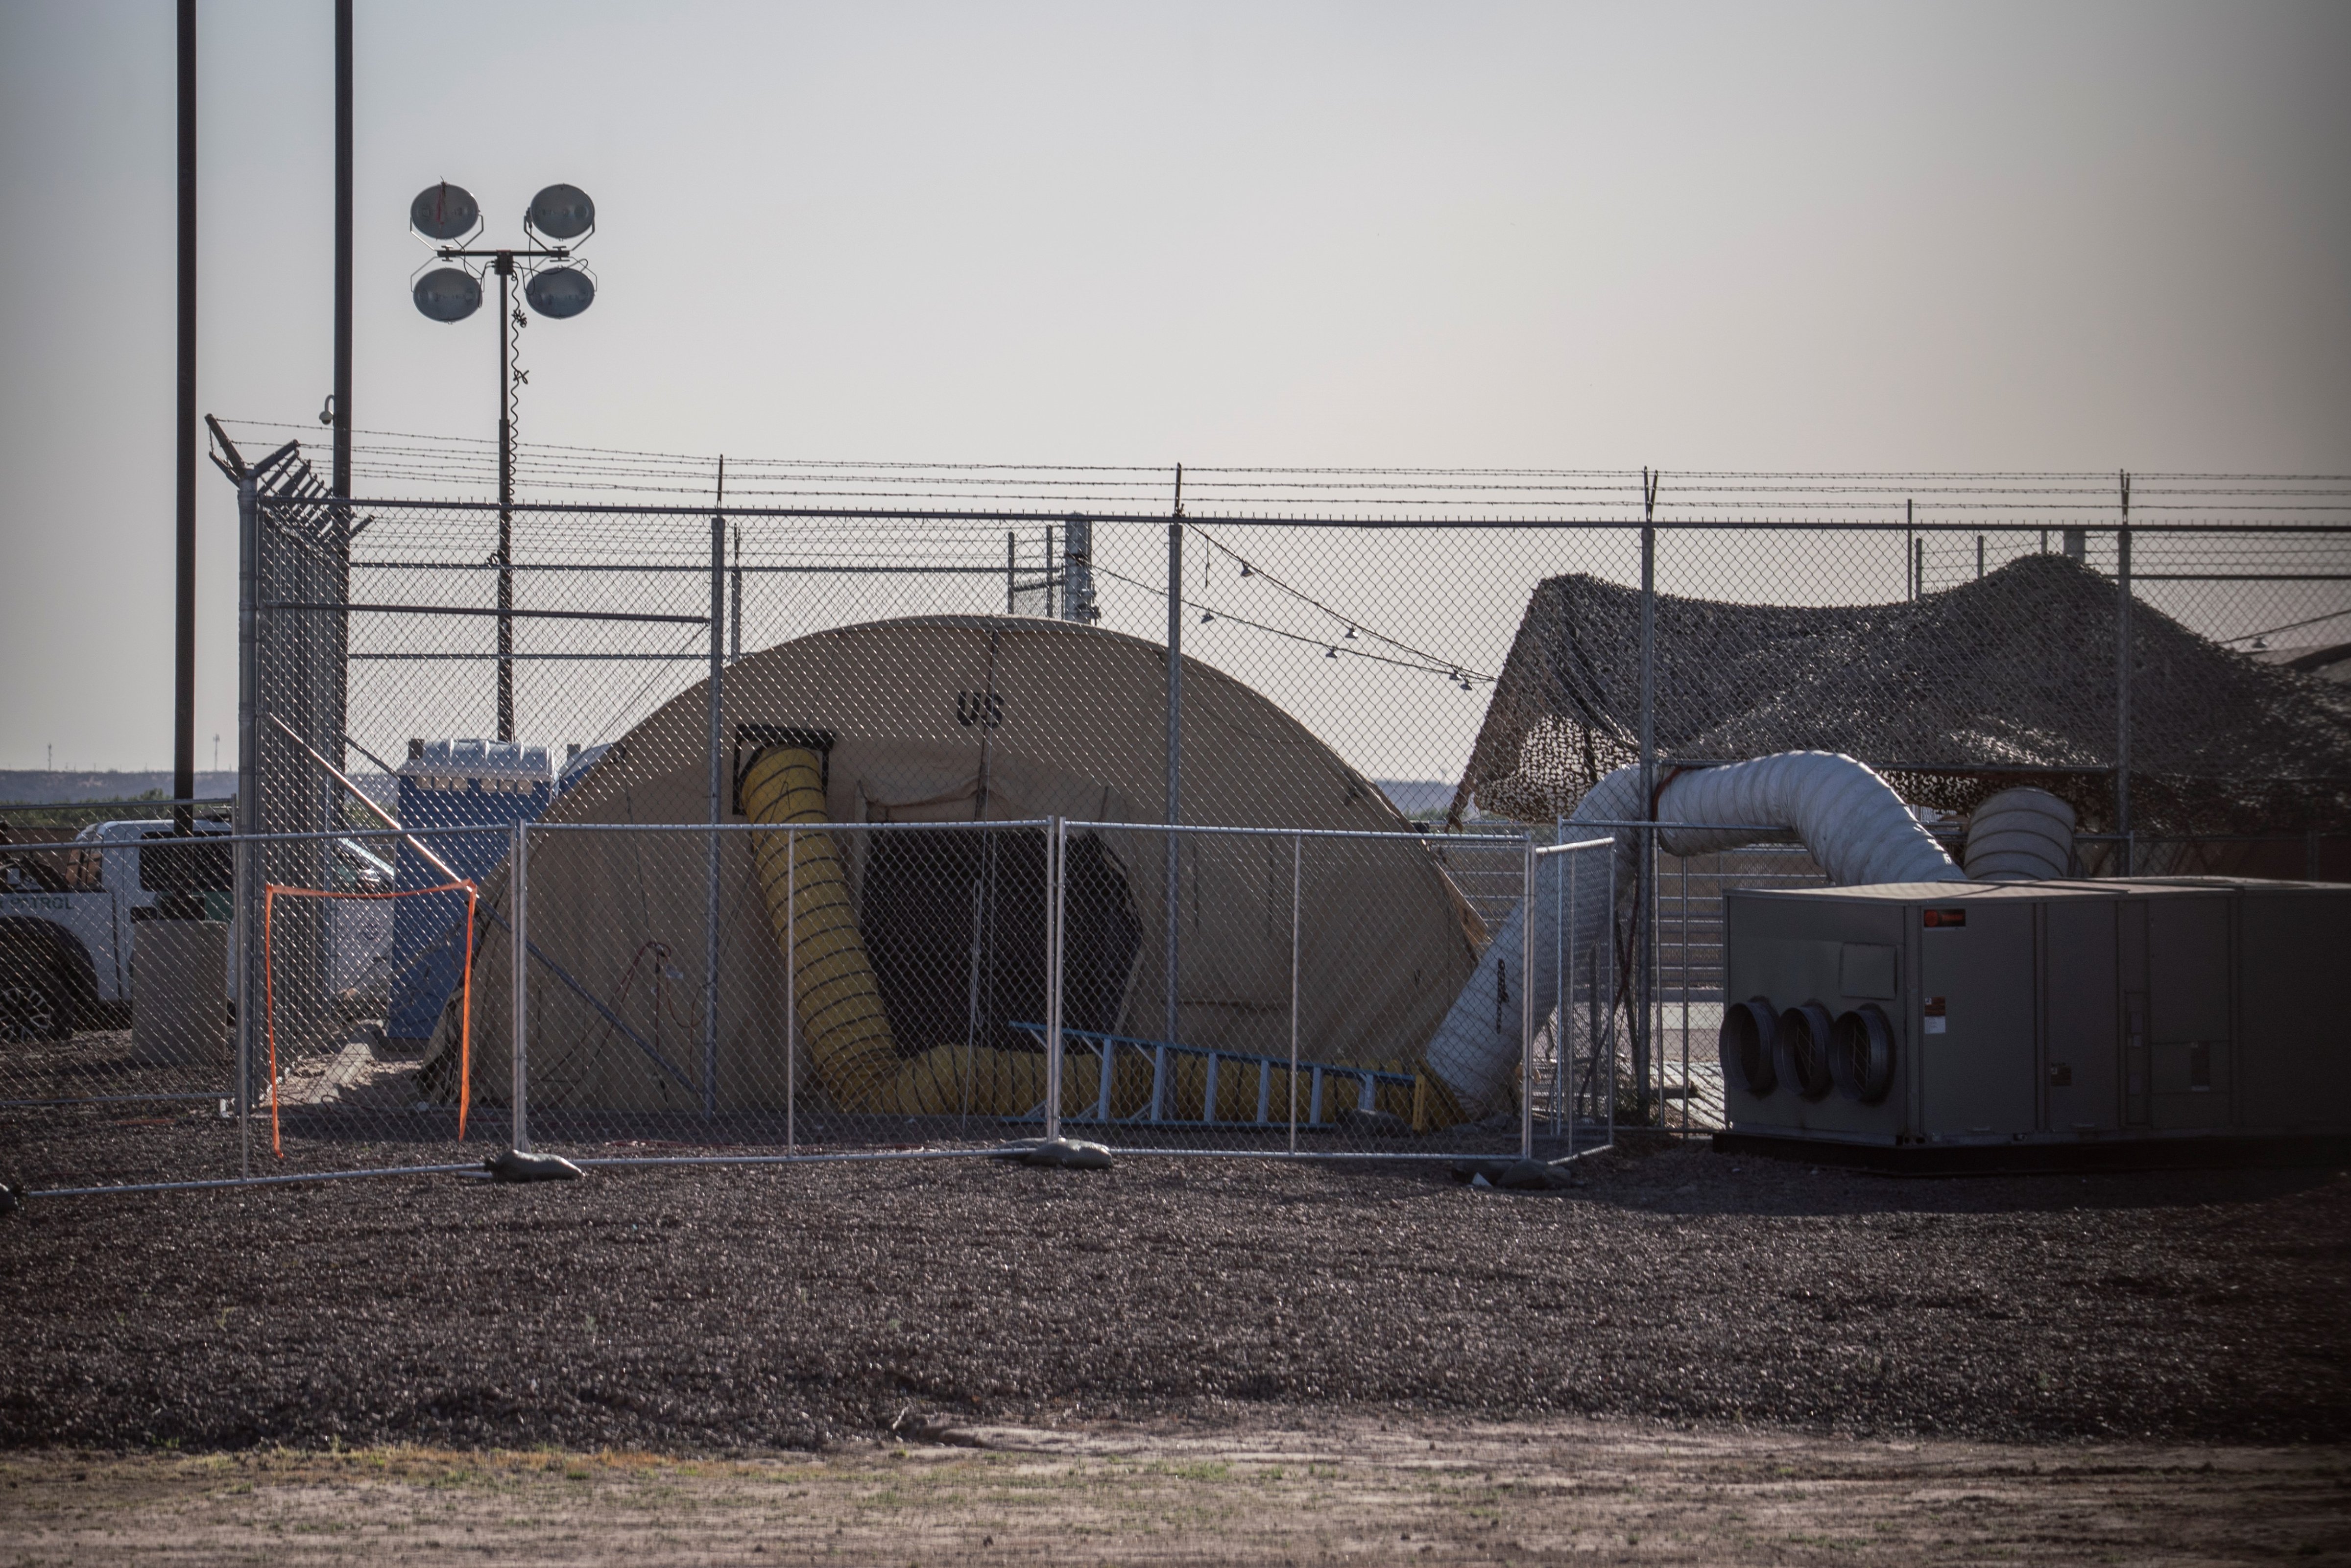 A temporary facility set up to hold migrants is pictured at a United States Border Patrol Station in Clint, Texas, on June 25, 2019. (PAUL RATJE—AFP/Getty Images)